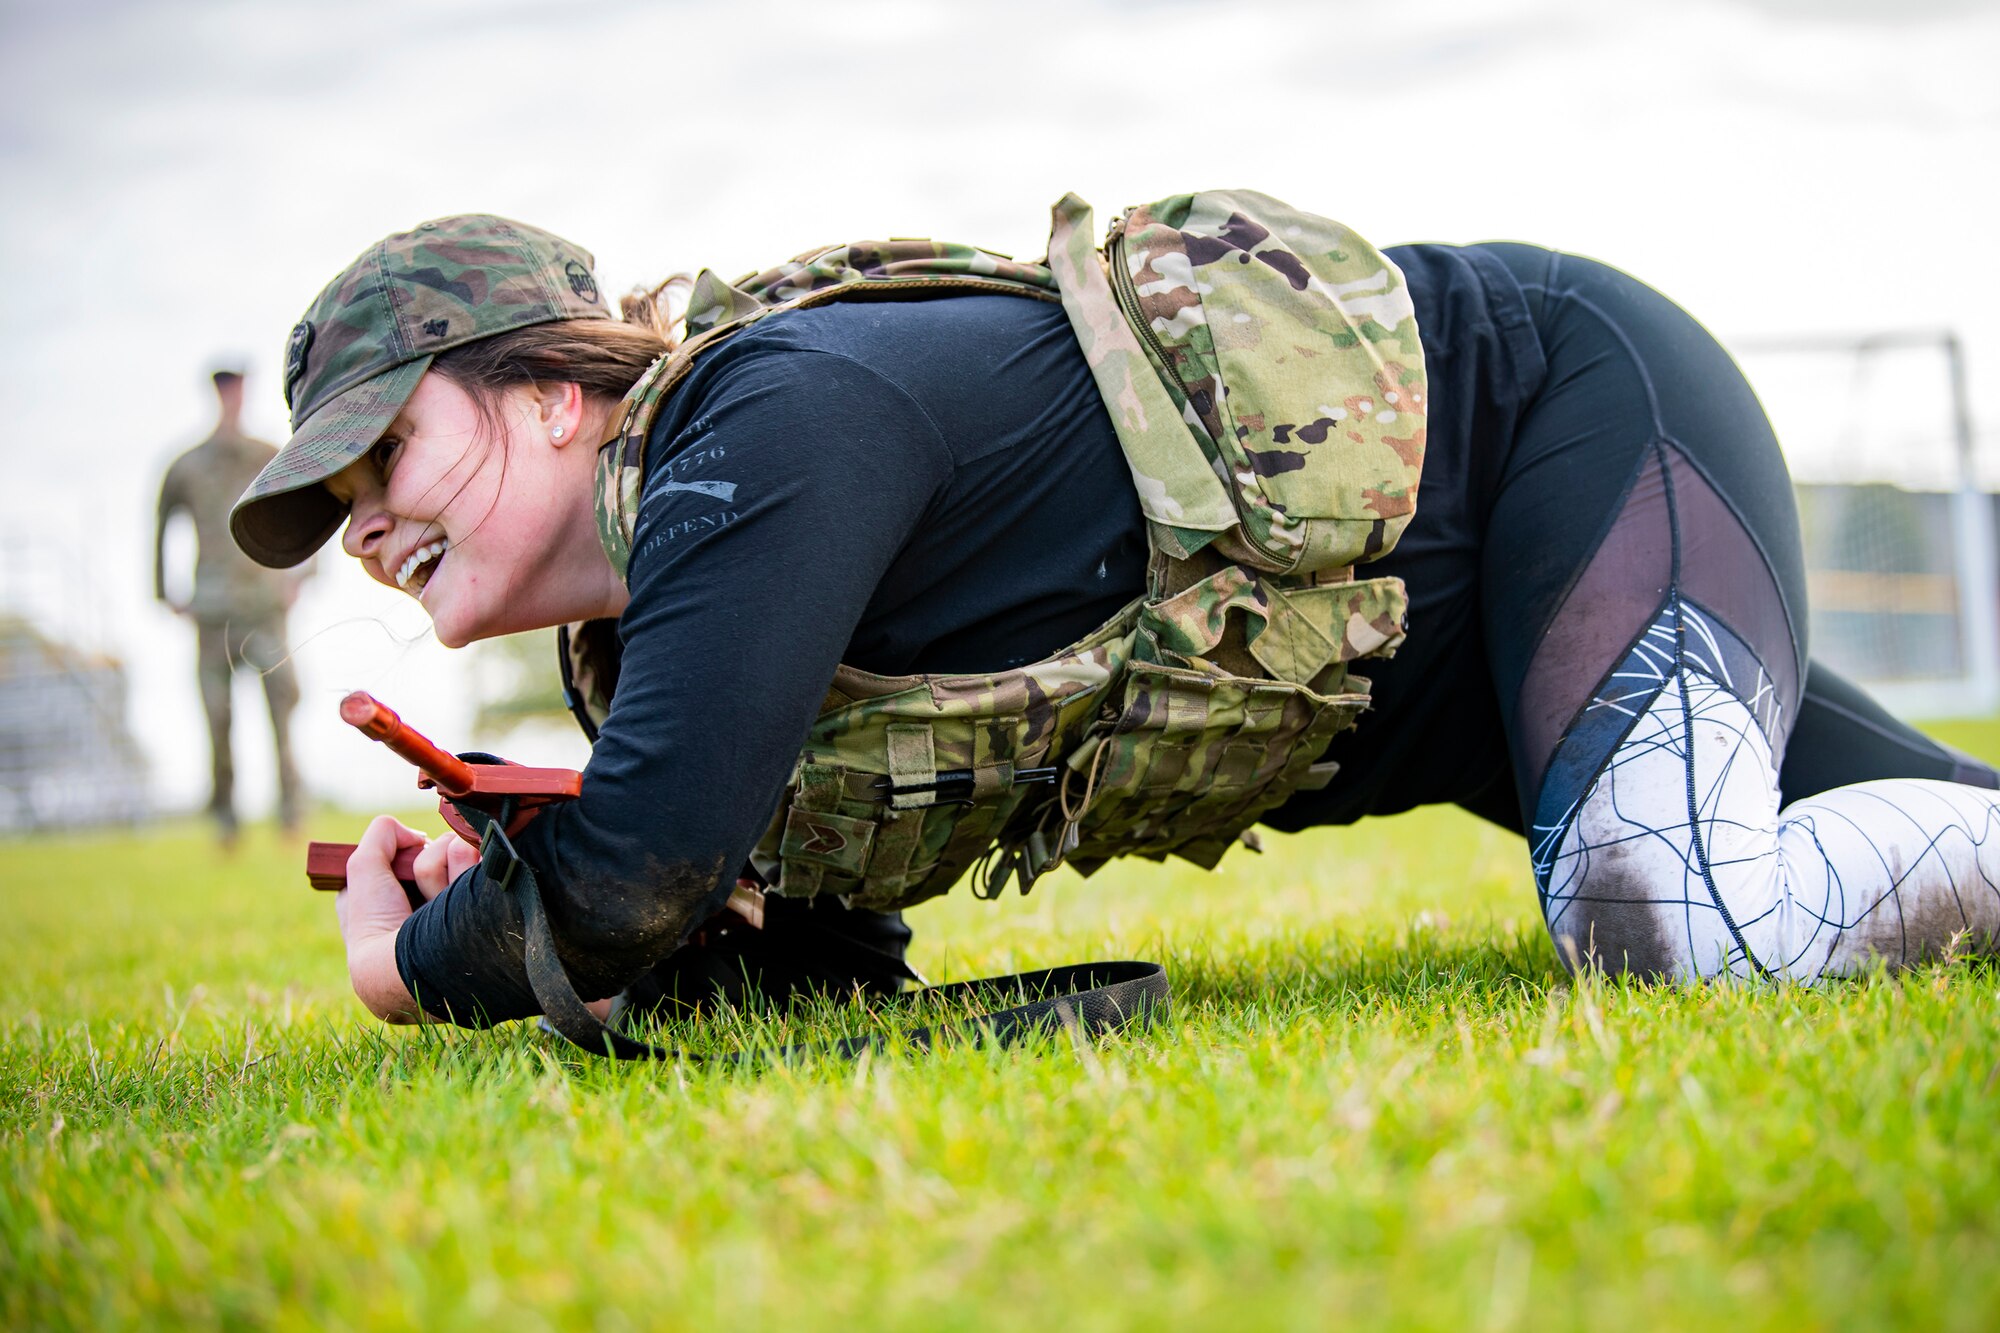 U.S. Air Force Staff Sgt. Meghan Ballard, 423rd Security Forces Squadron NCO in charge of pass and registration, low crawls as part of a defender challenge at RAF Alconbury, England, Oct. 13, 2021. The challenge was part of National Police Week where defenders paid homage to those who have served as police officers and to honor those that lost their lives in the line of duty. (U.S. Air Force photo by Senior Airman Eugene Oliver)